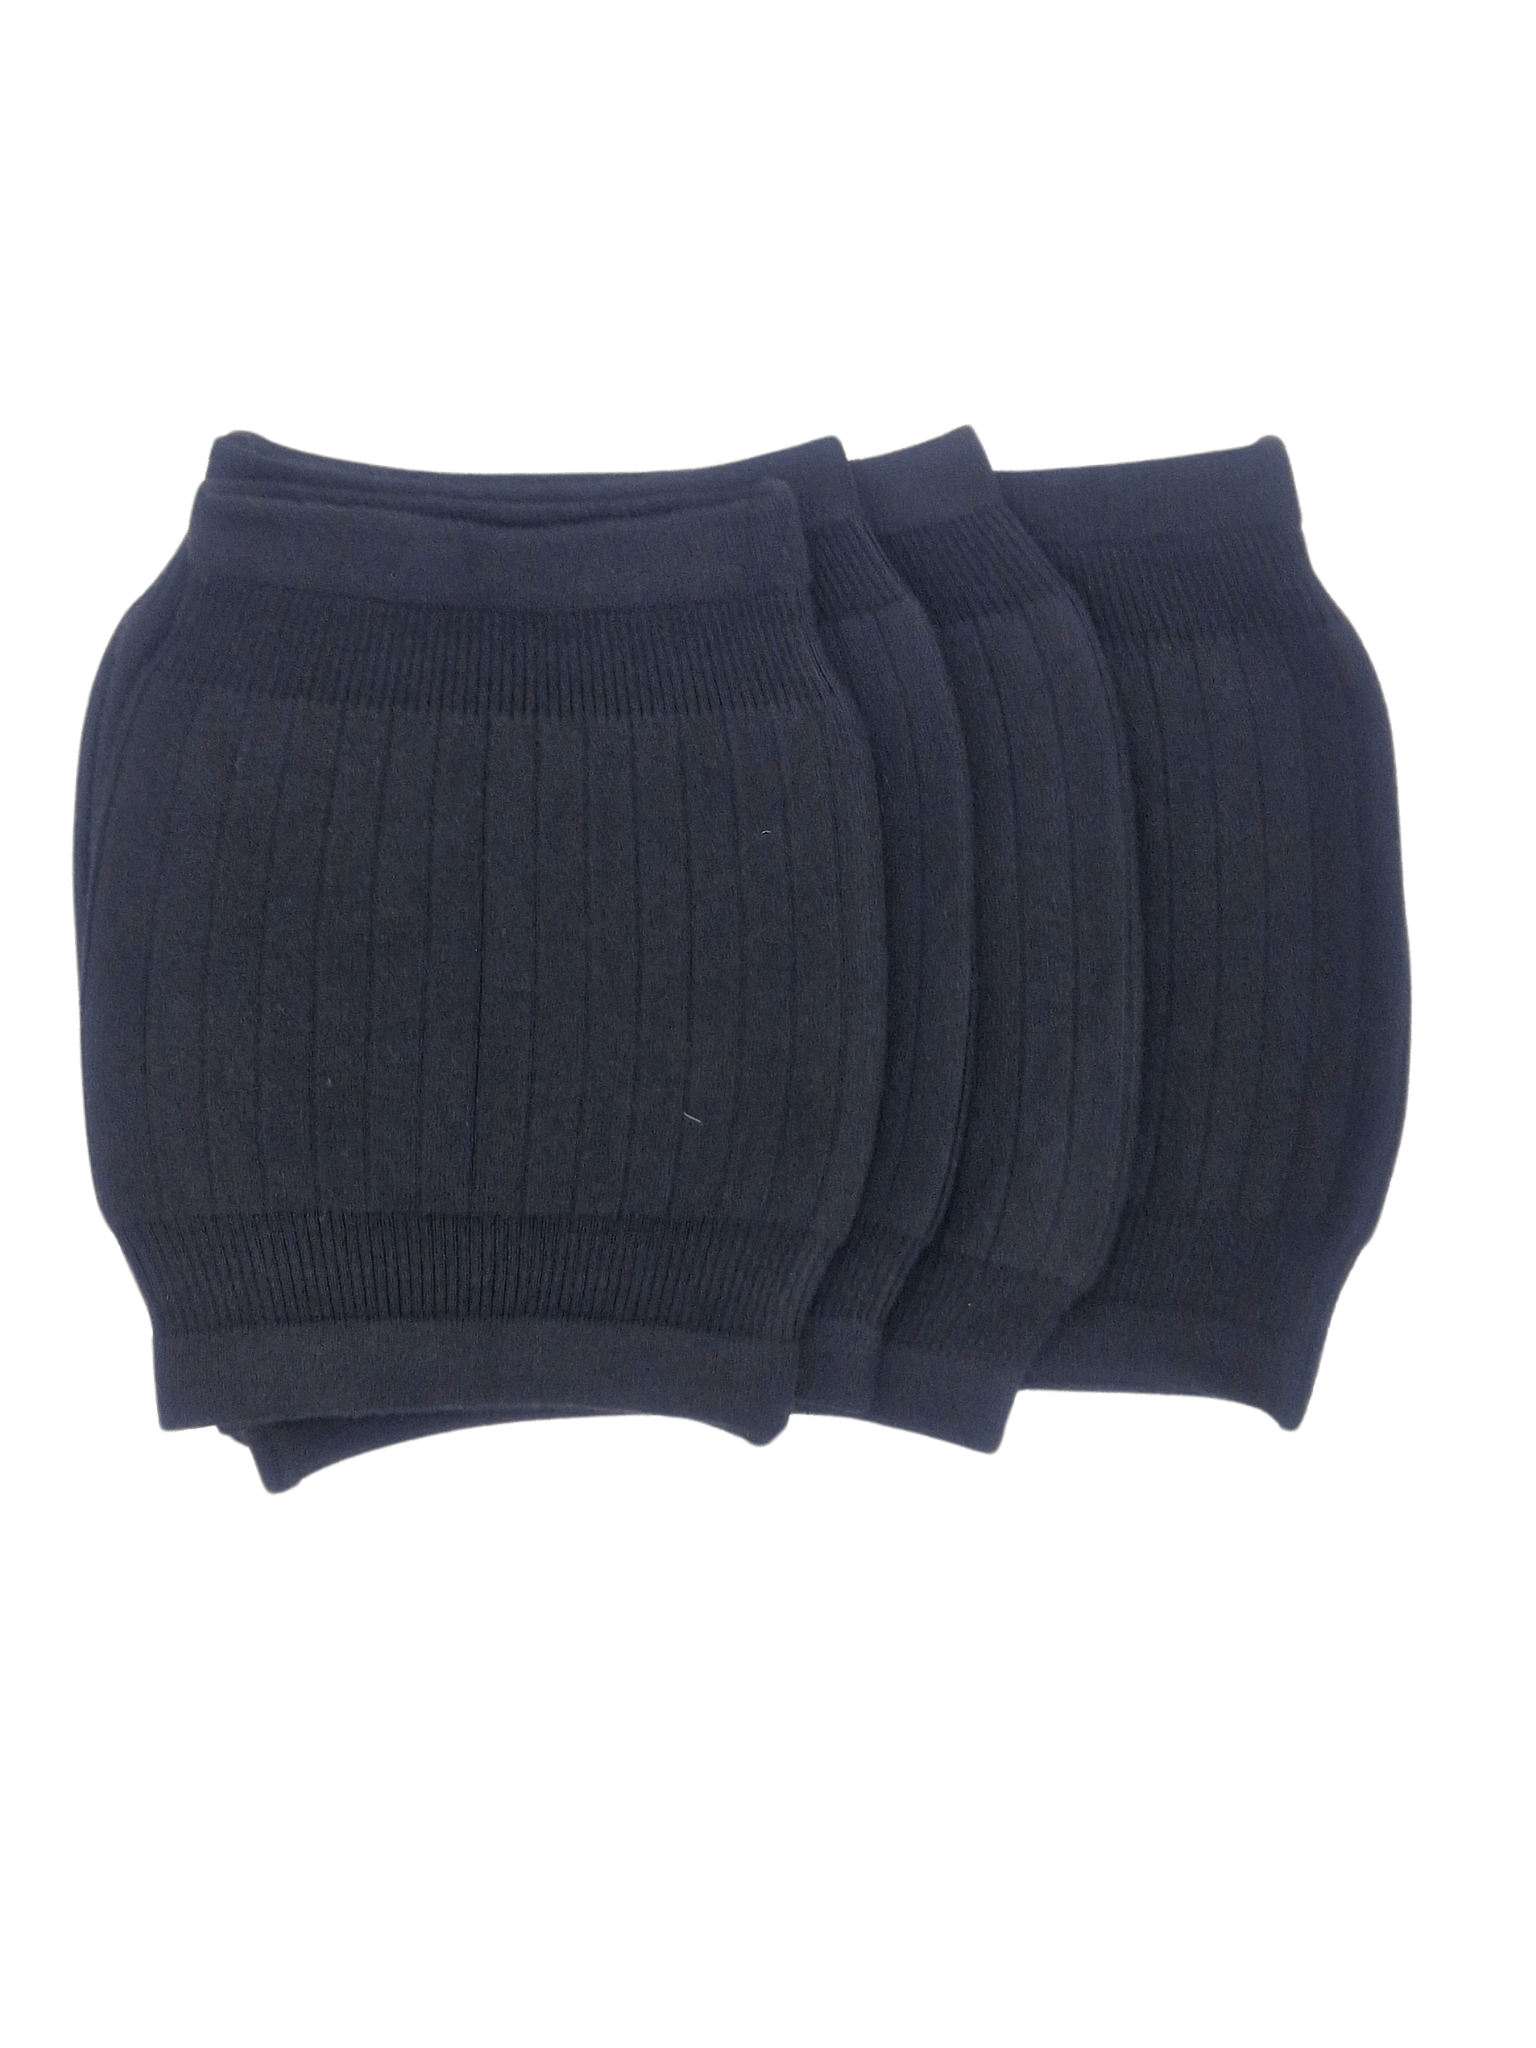 black knitted core warmer in 4 sizes M, L, Xl and XXL